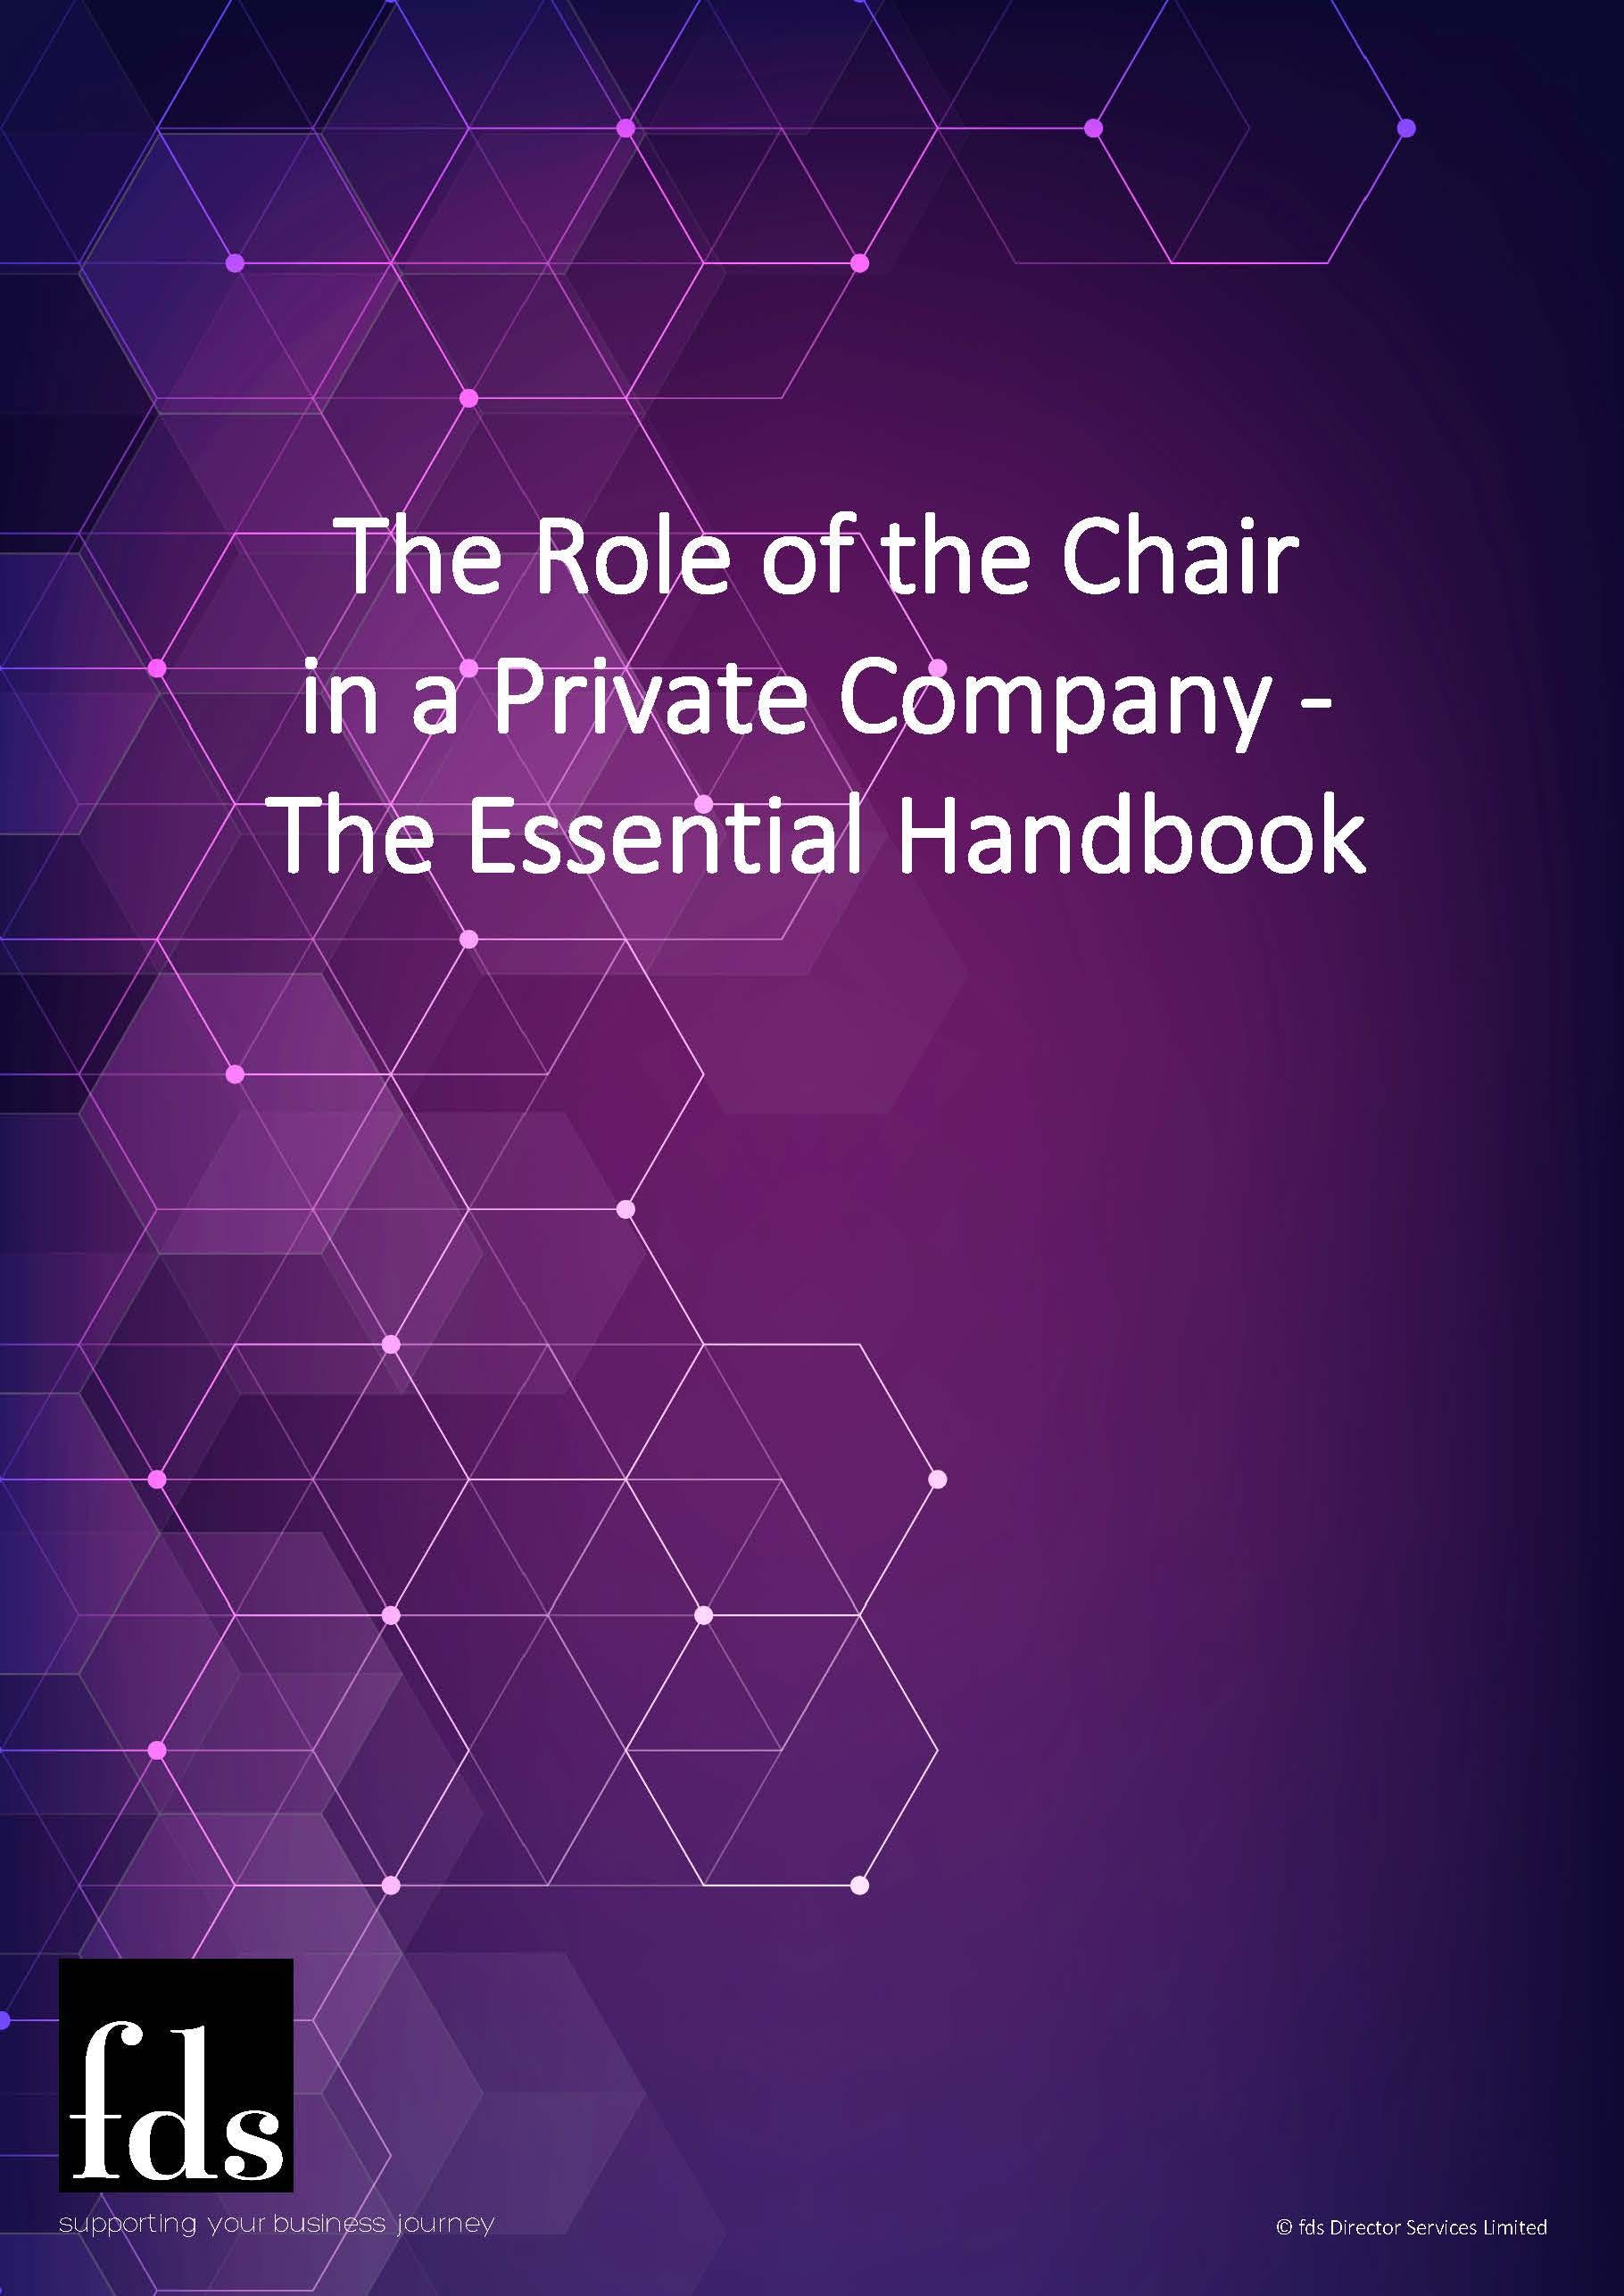 fds - The Role of the Chair in a Private Company Downloadable Resource